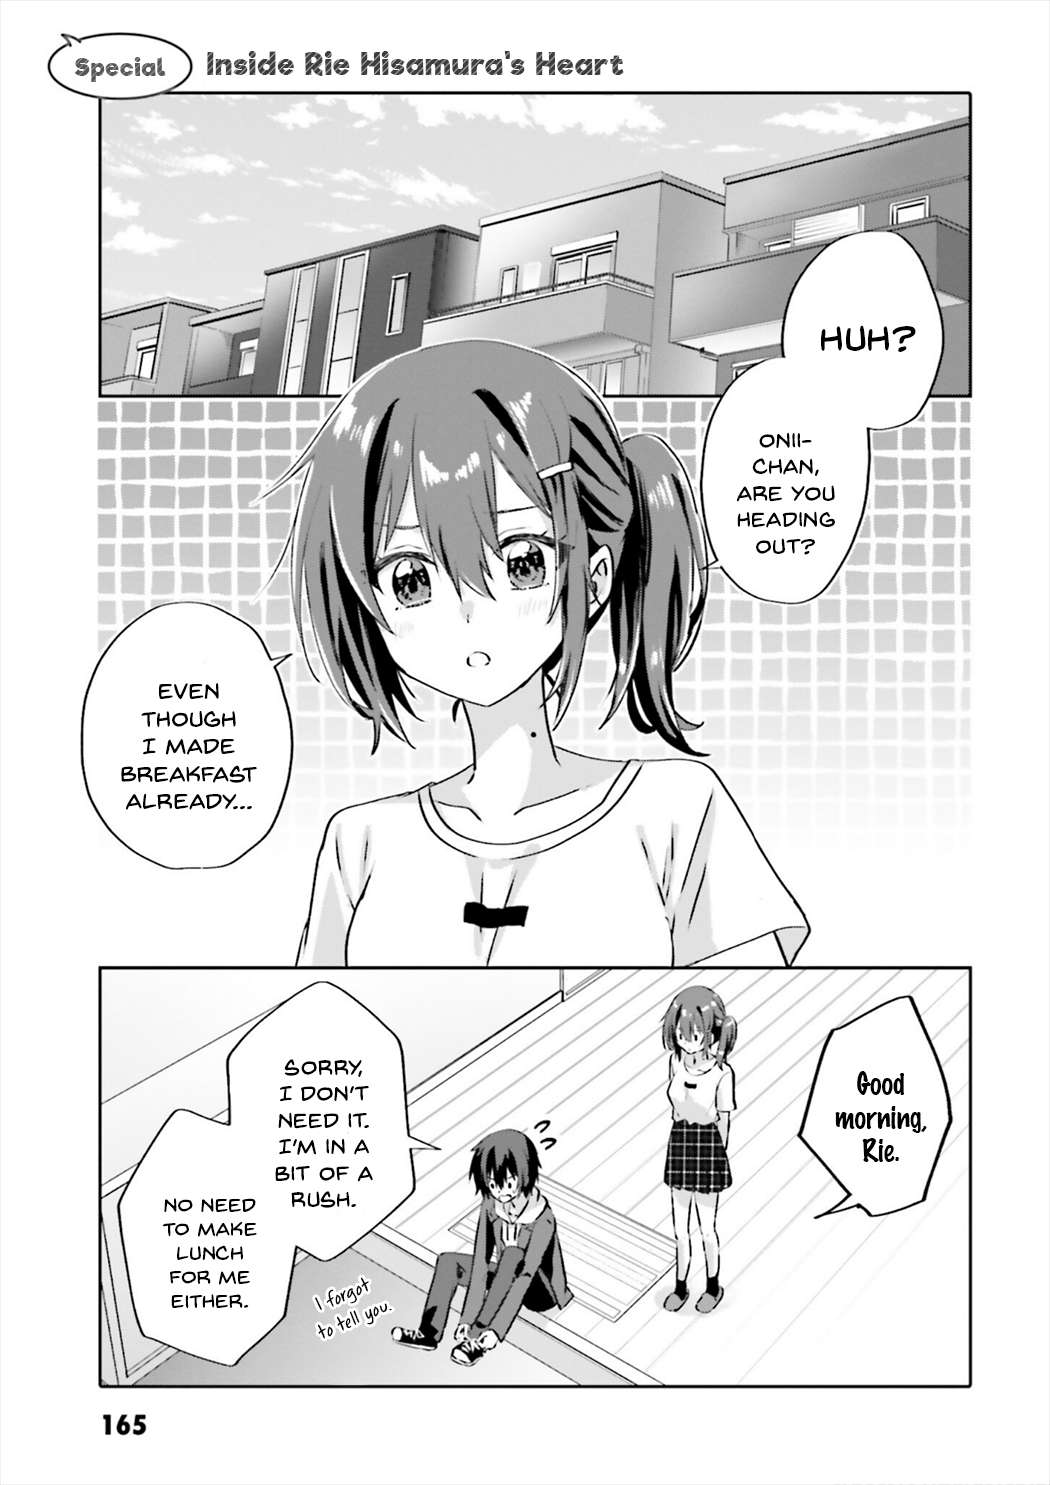 Since I’Ve Entered The World Of Romantic Comedy Manga, I’Ll Do My Best To Make The Losing Heroine Happy - chapter 6.5 - #1